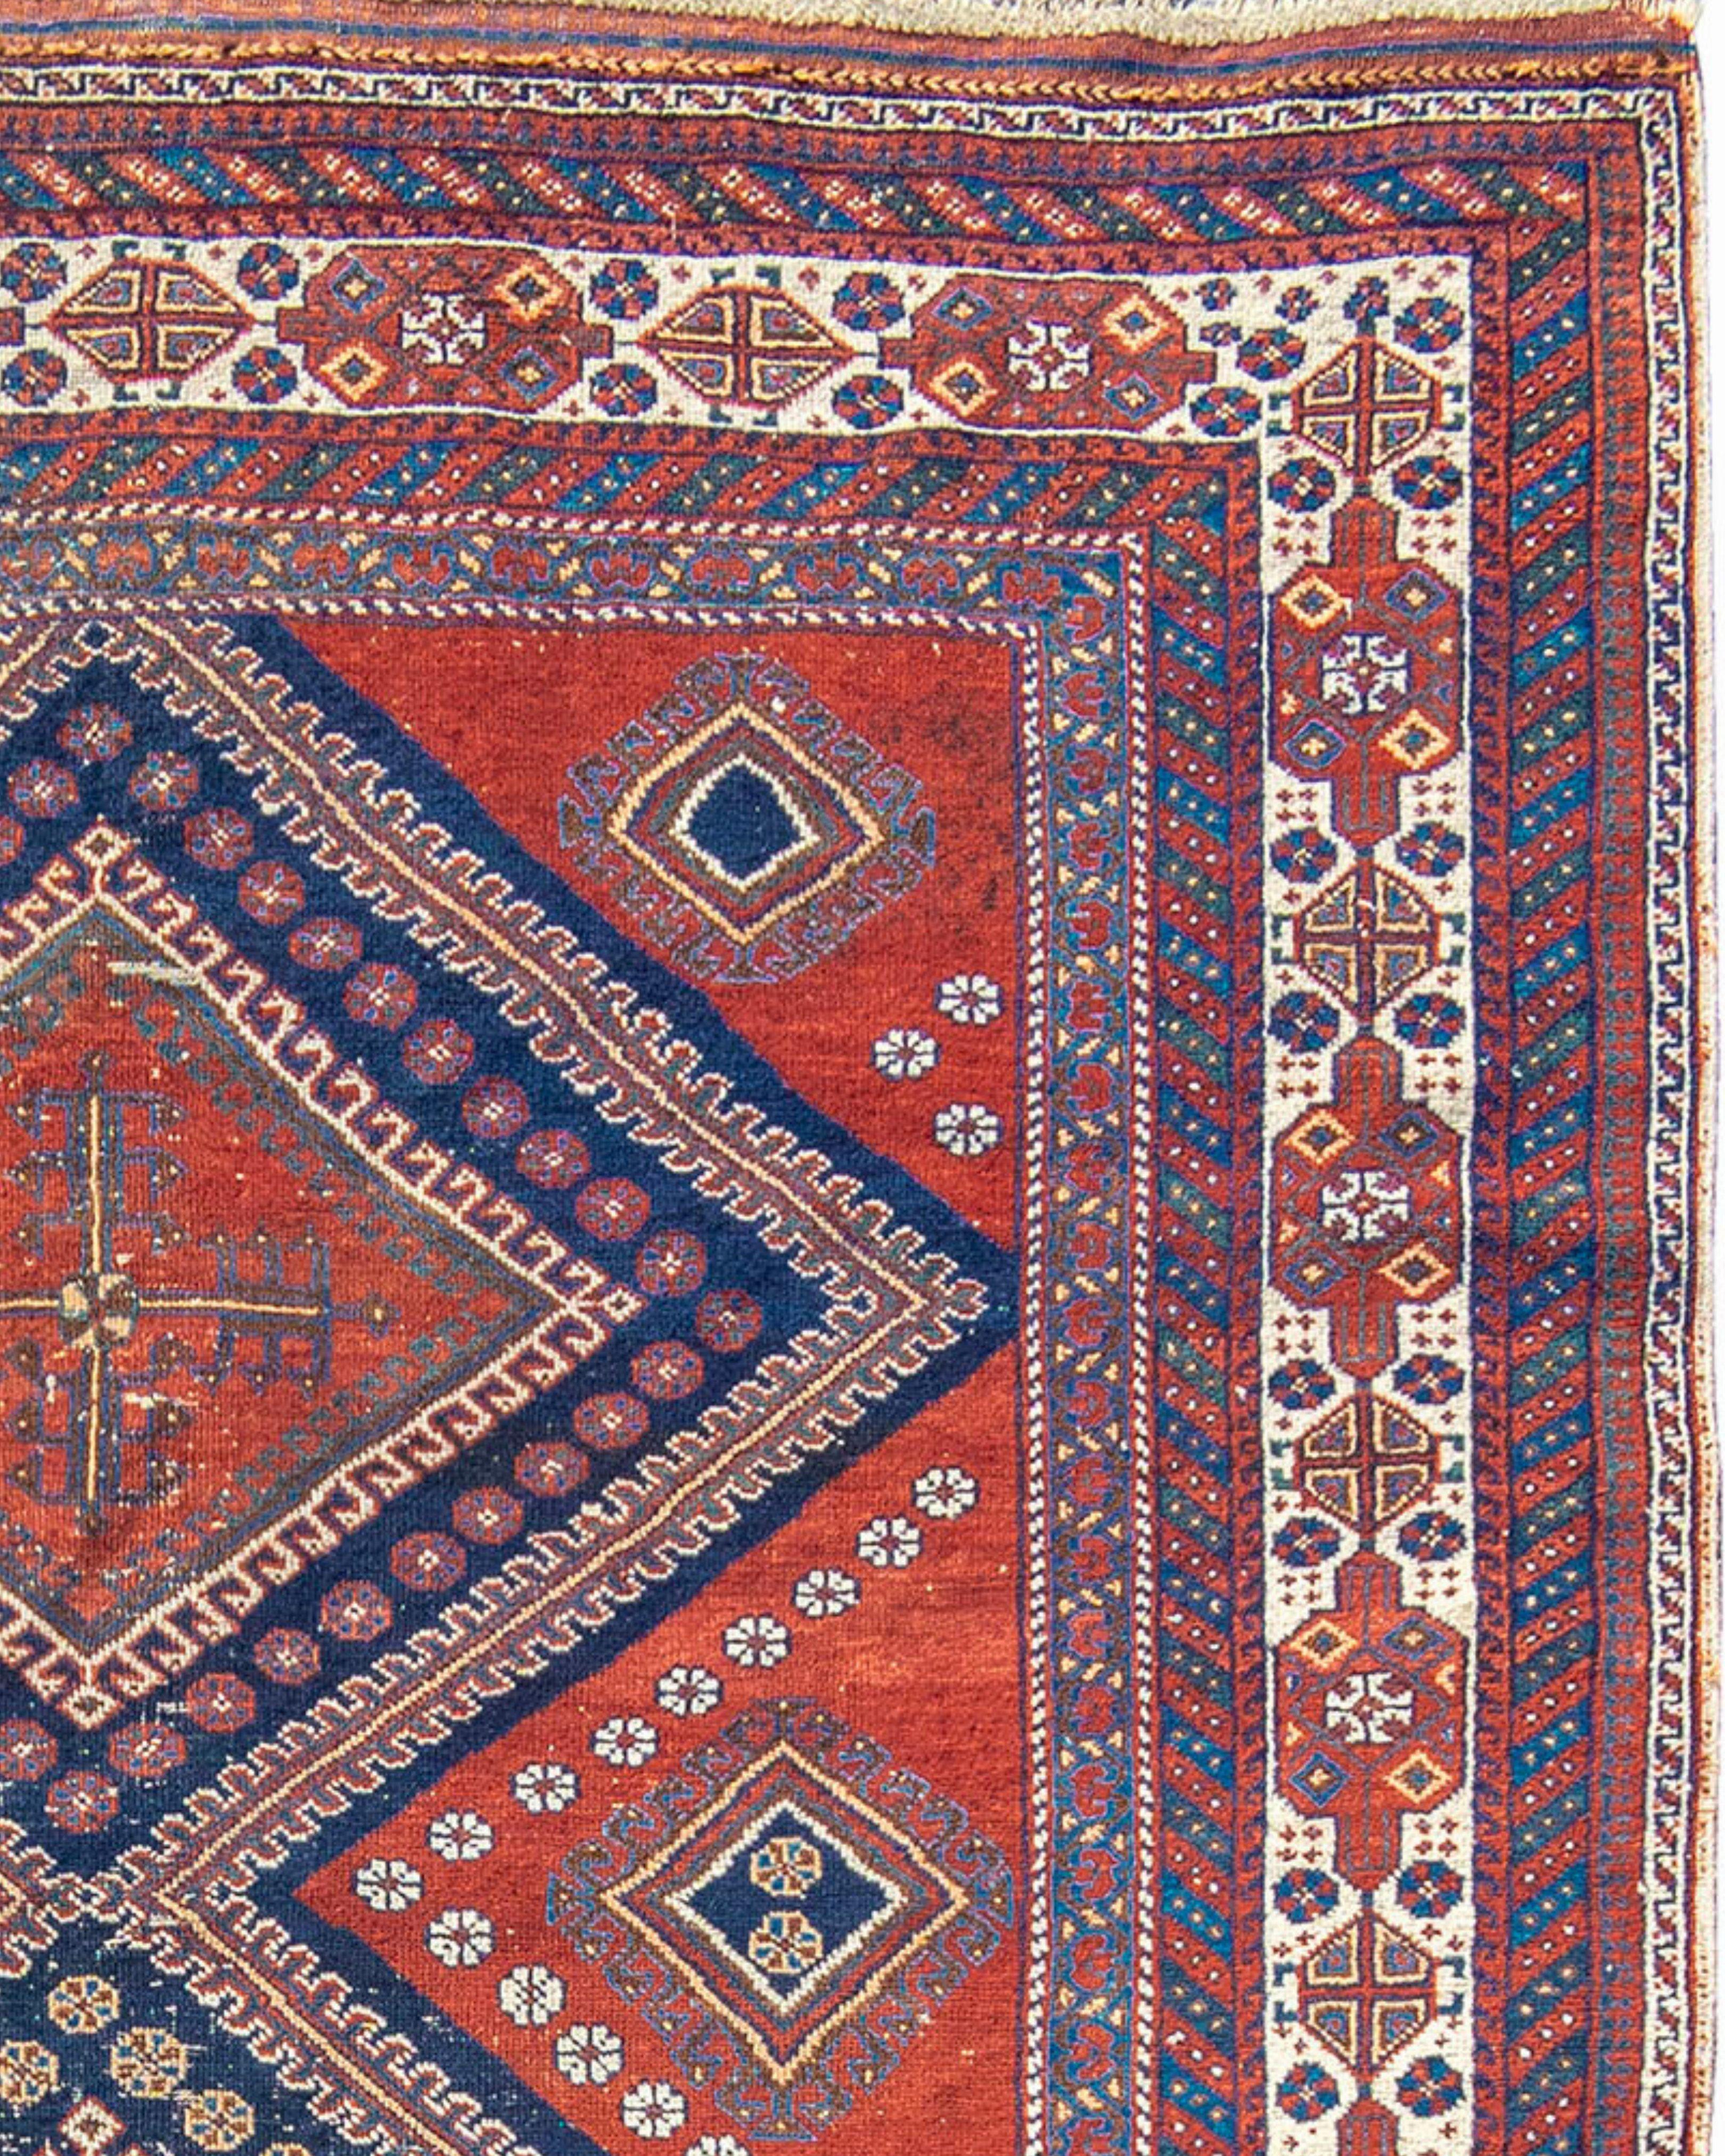 Tapis persan ancien Afshar, vers 1900

Informations supplémentaires :
Dimensions : 4'6